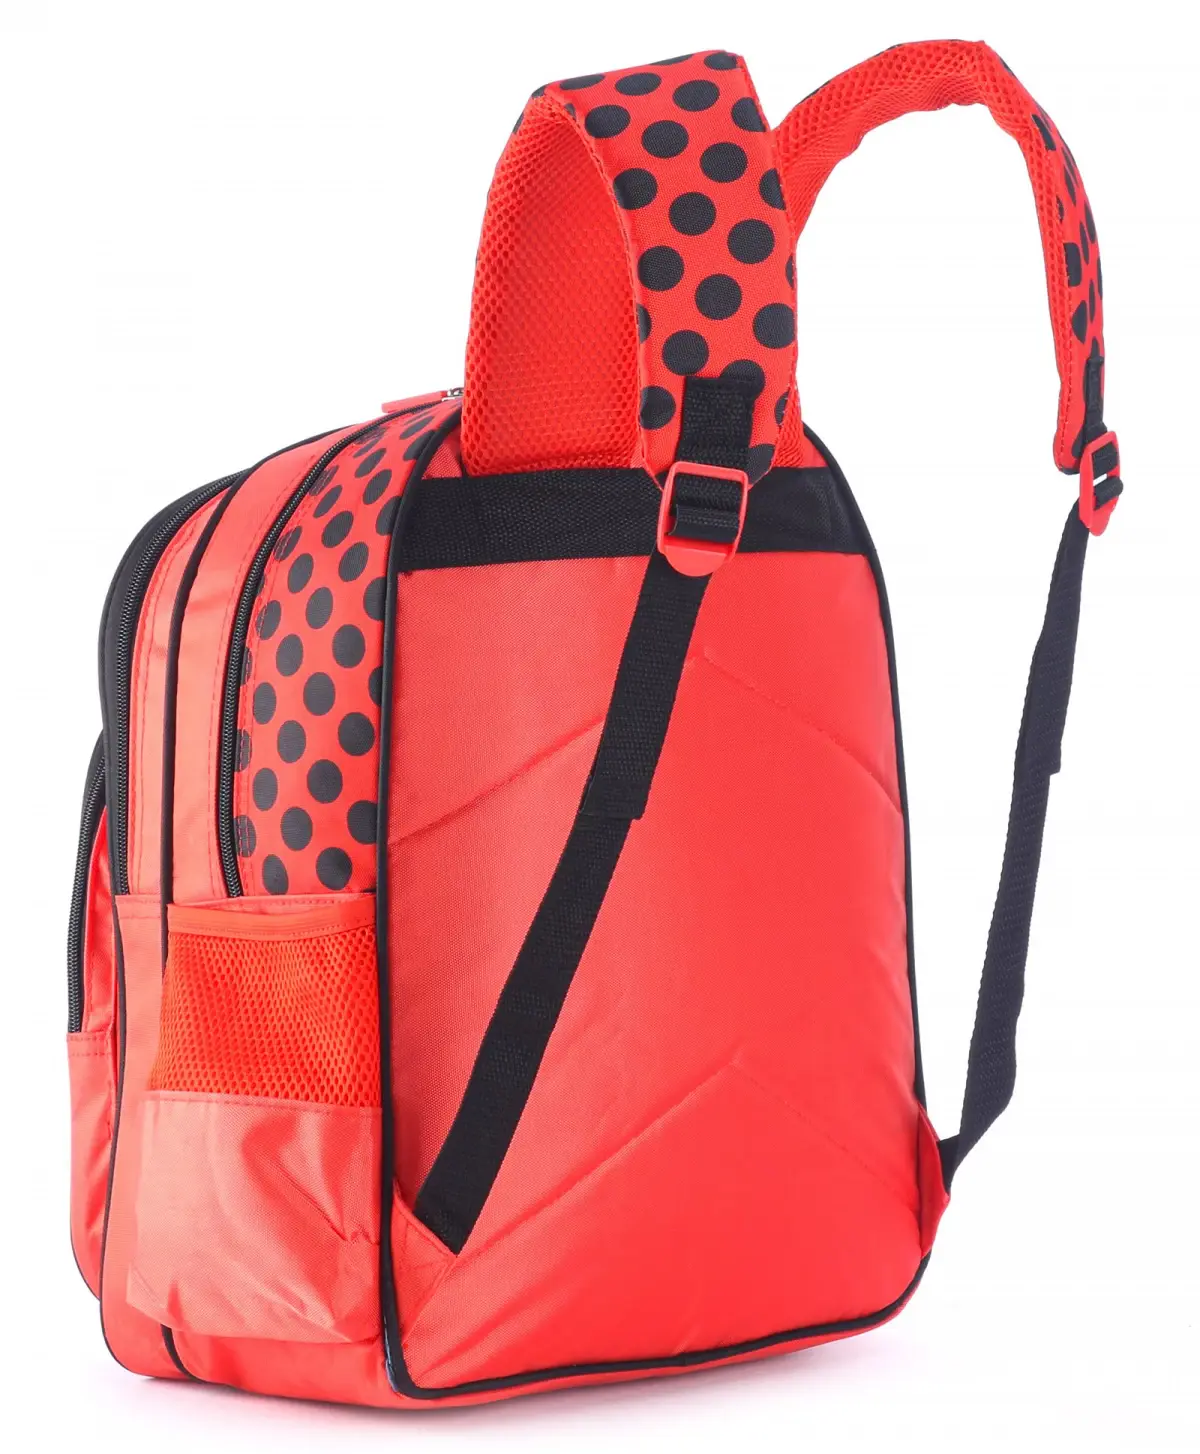 Striders 14 inches Miraculous Elevate Back-to-School with Our Stylish Miraculous School Bag Multicolour, 3Y+